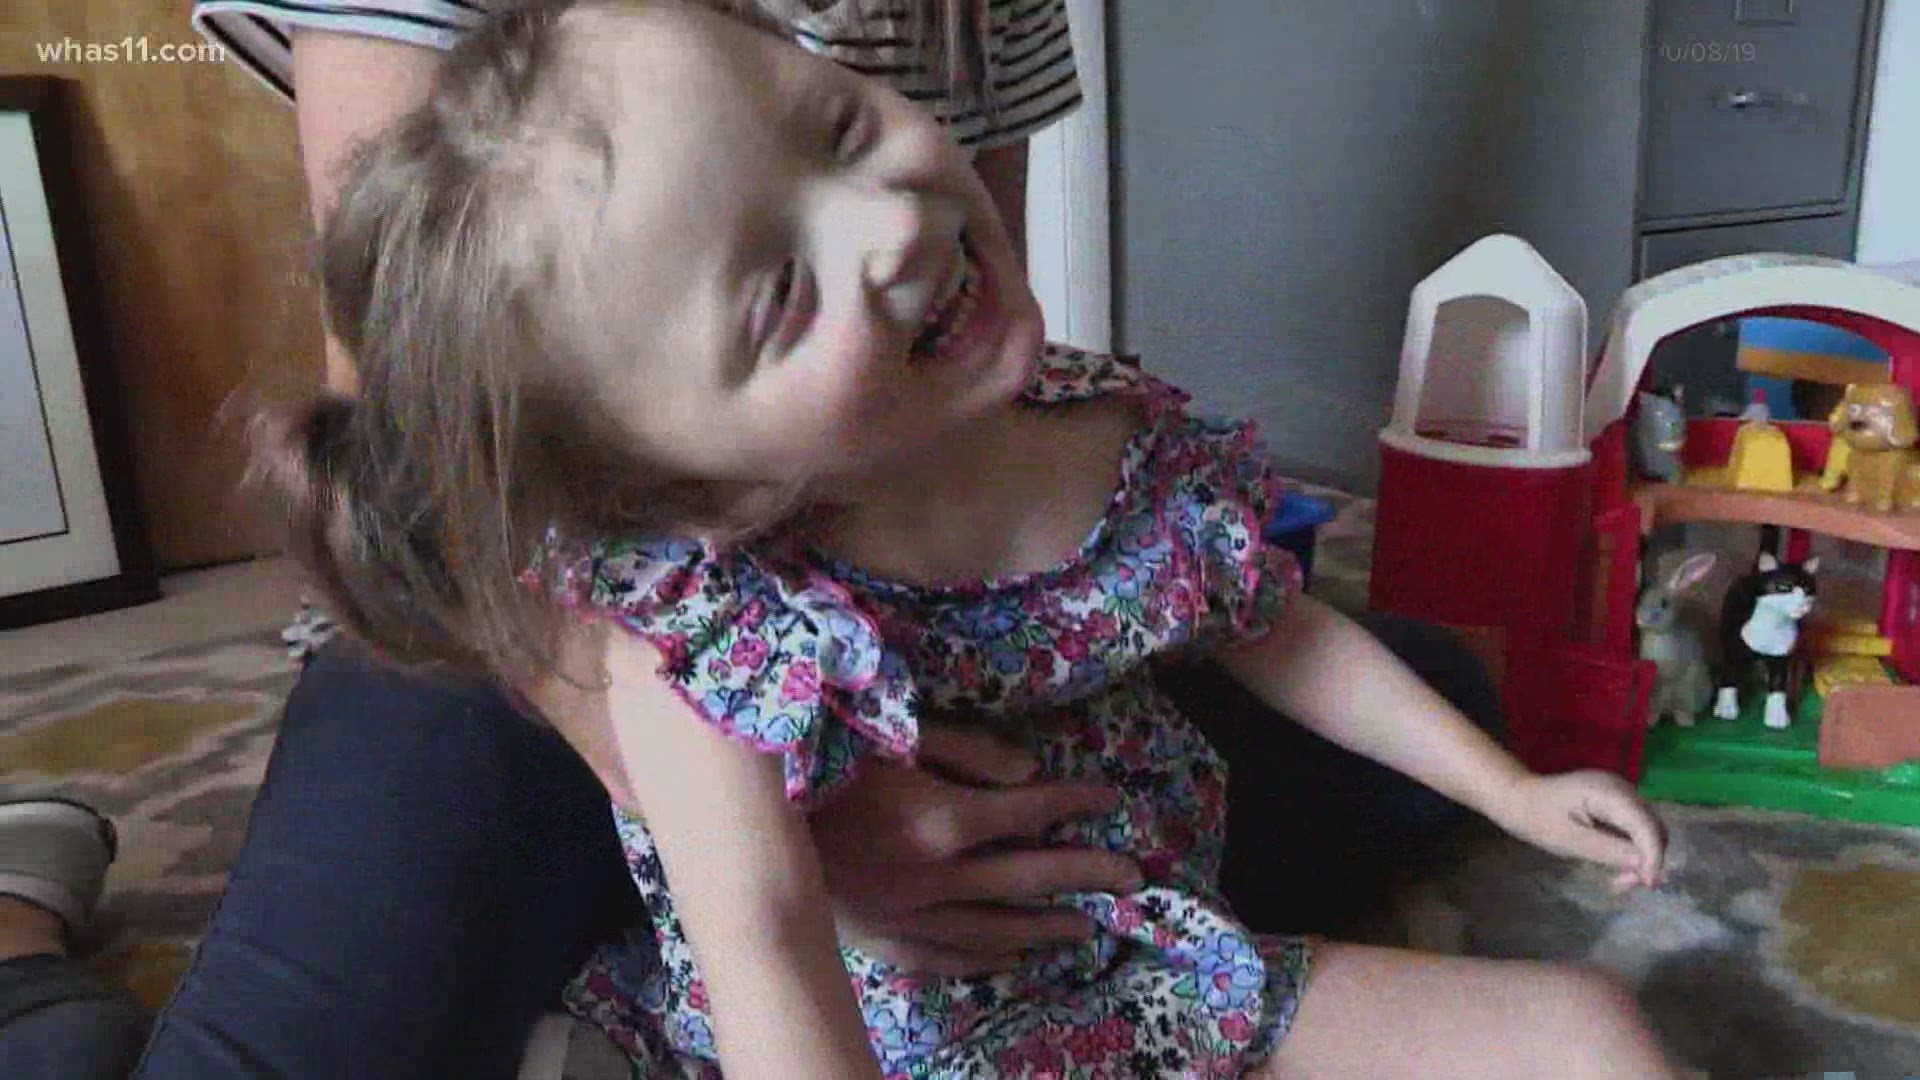 Cerebral palsy causes overall physical weakness and delays in what Jaycee wants to do or say.